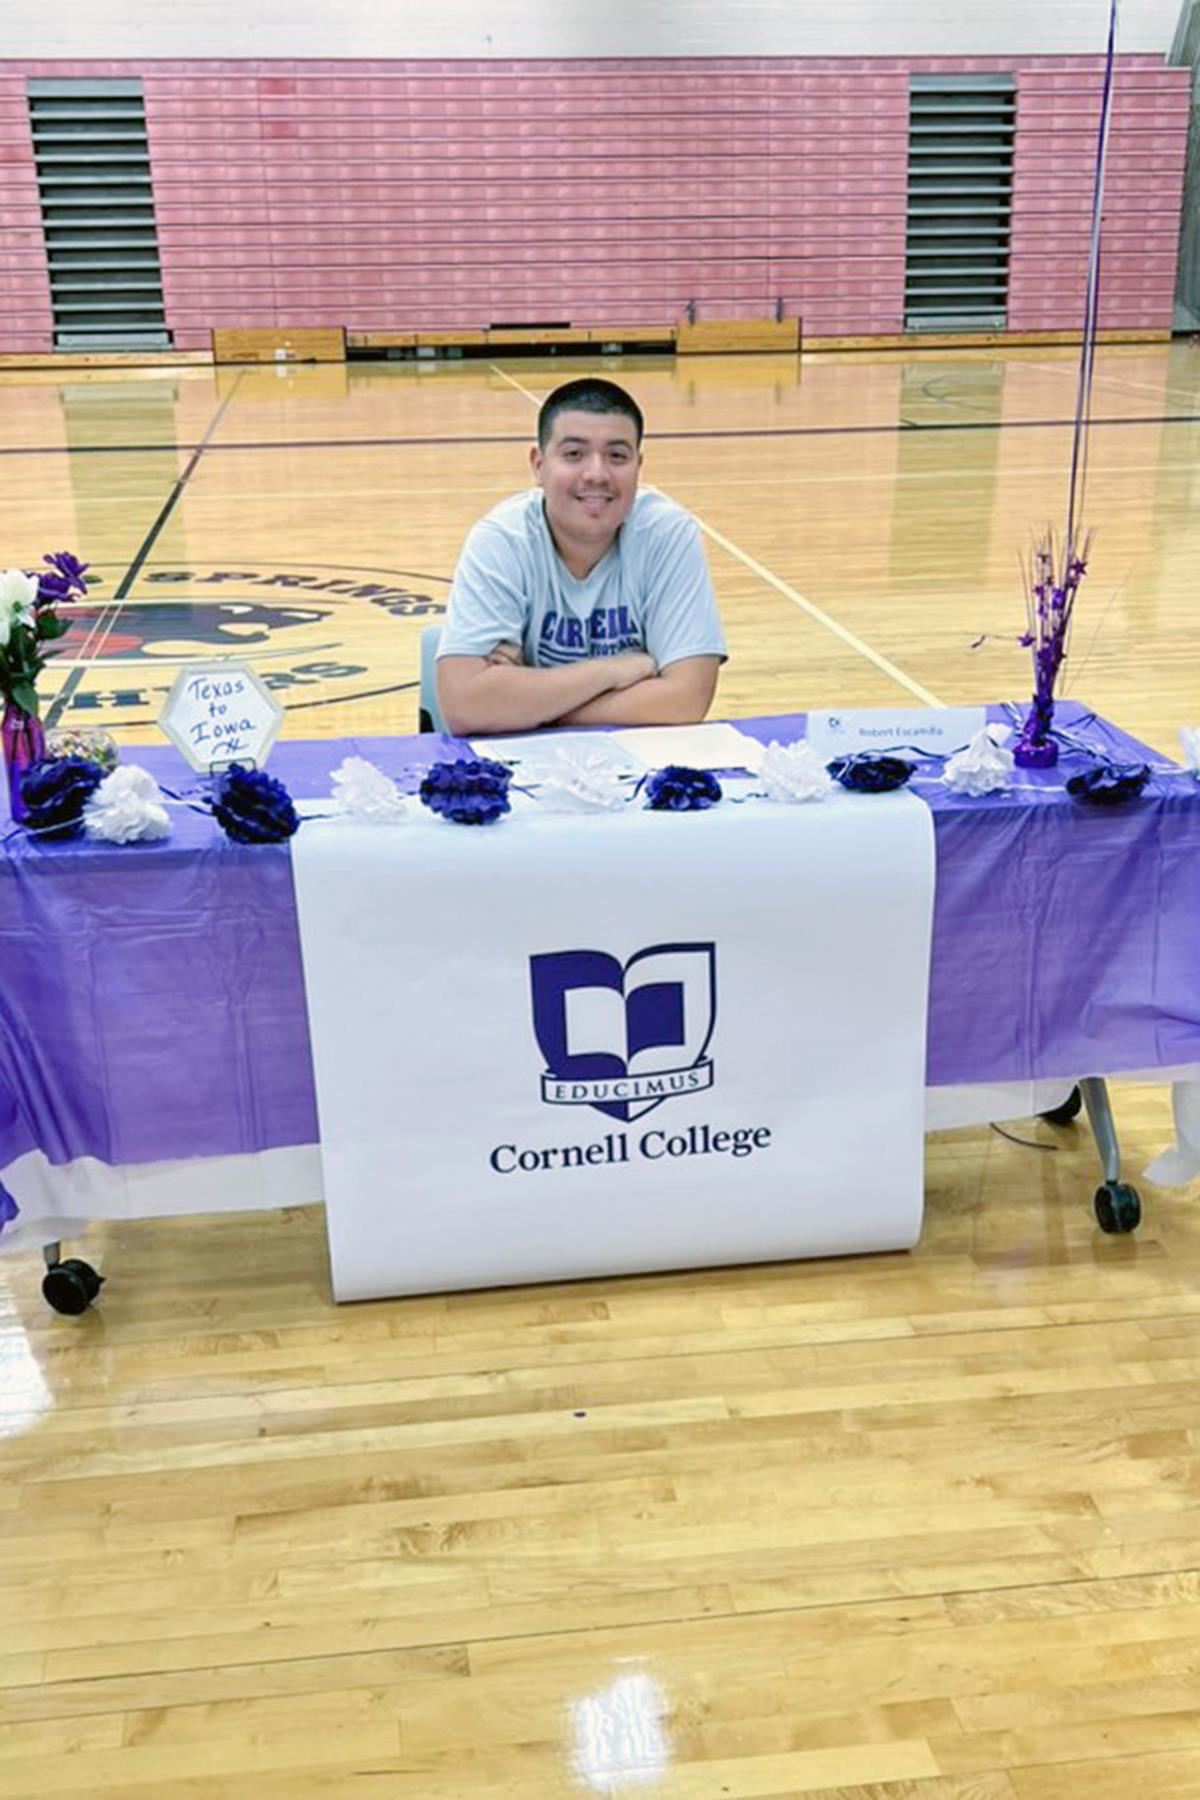 Cypress Springs High School senior Robert Escamilla signed a letter of intent to play football at Cornell College.